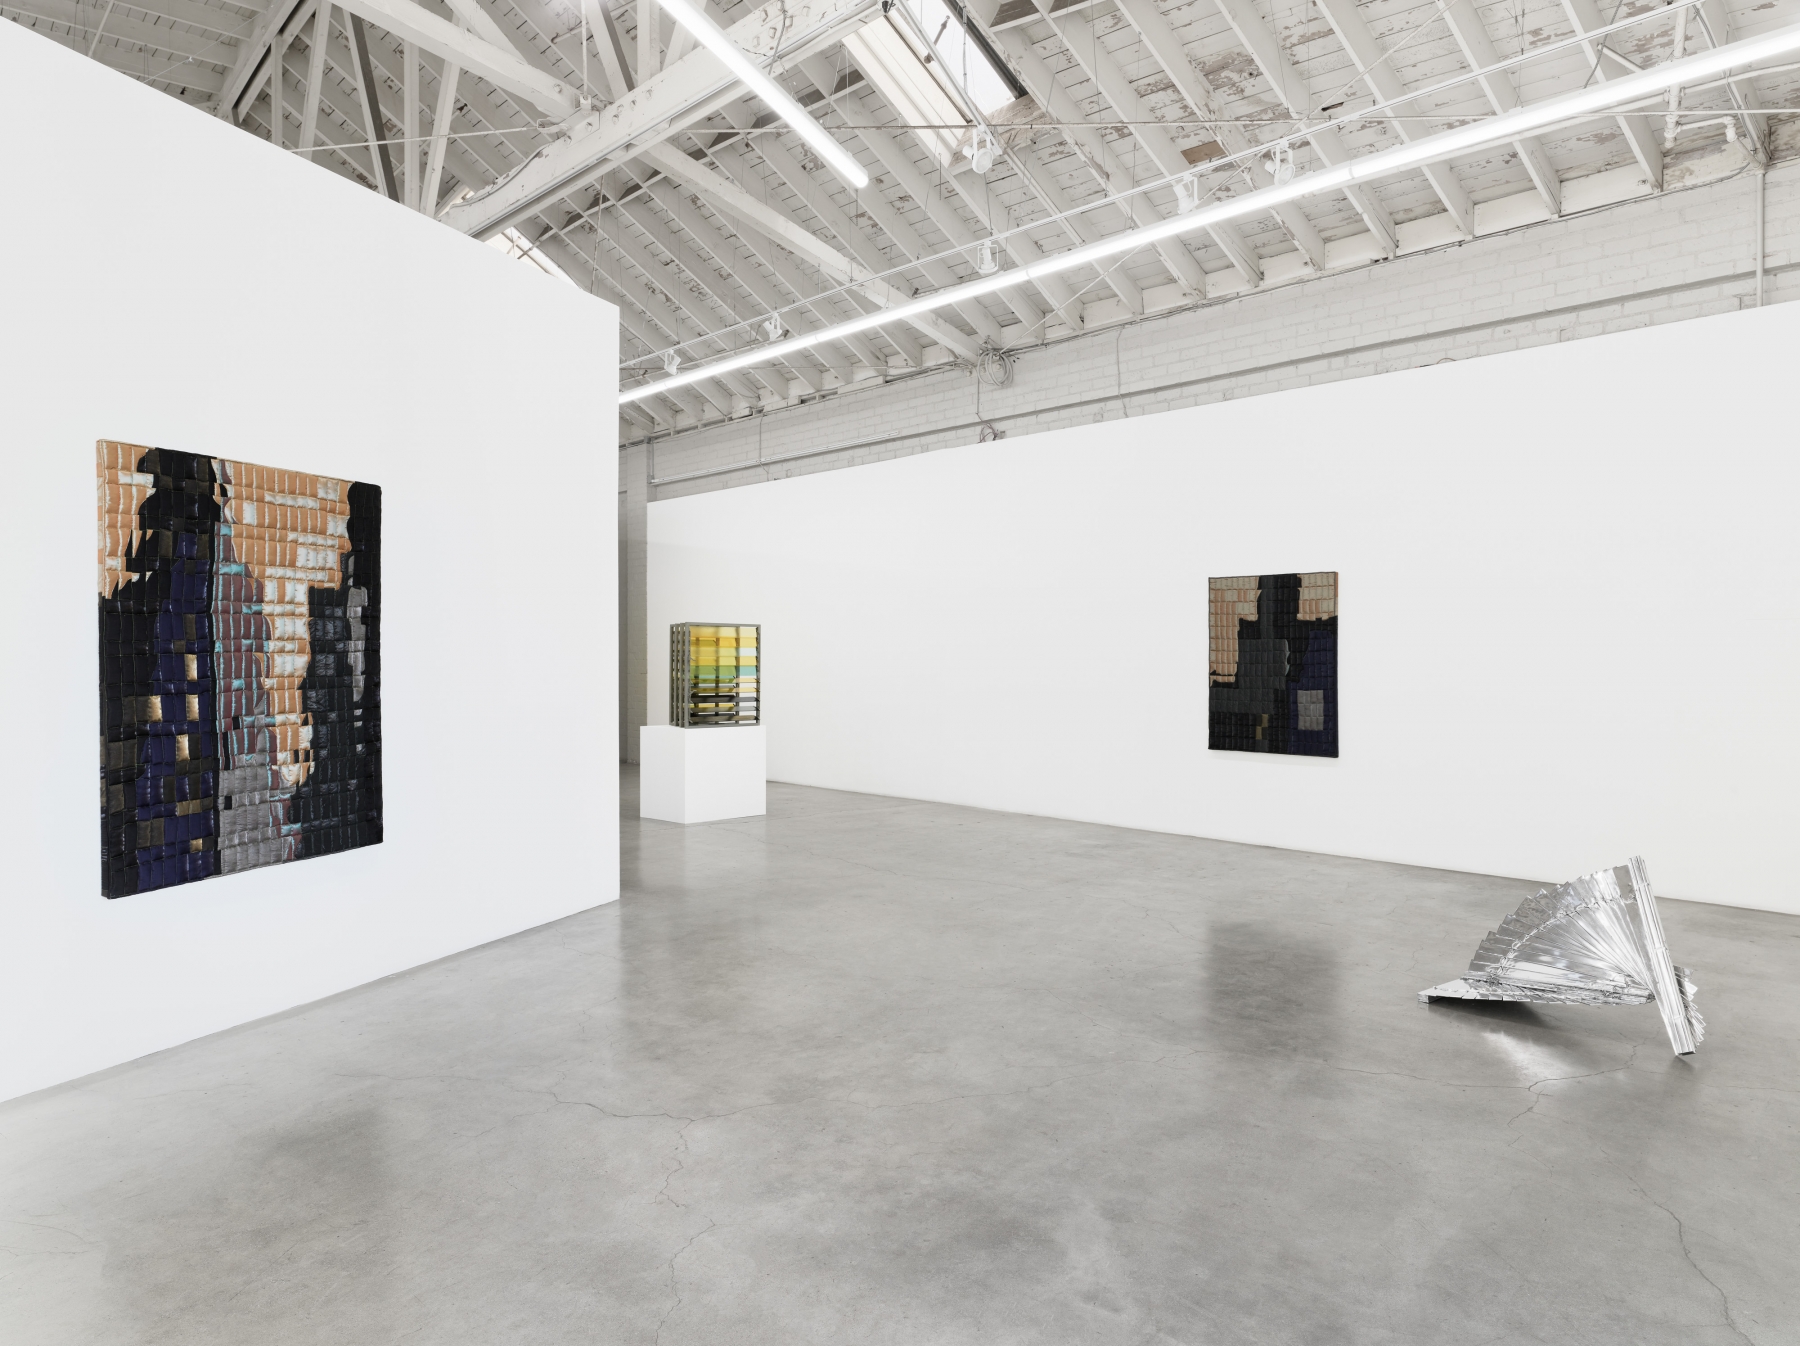 Anne Libby, See Me So, installation view, 2021